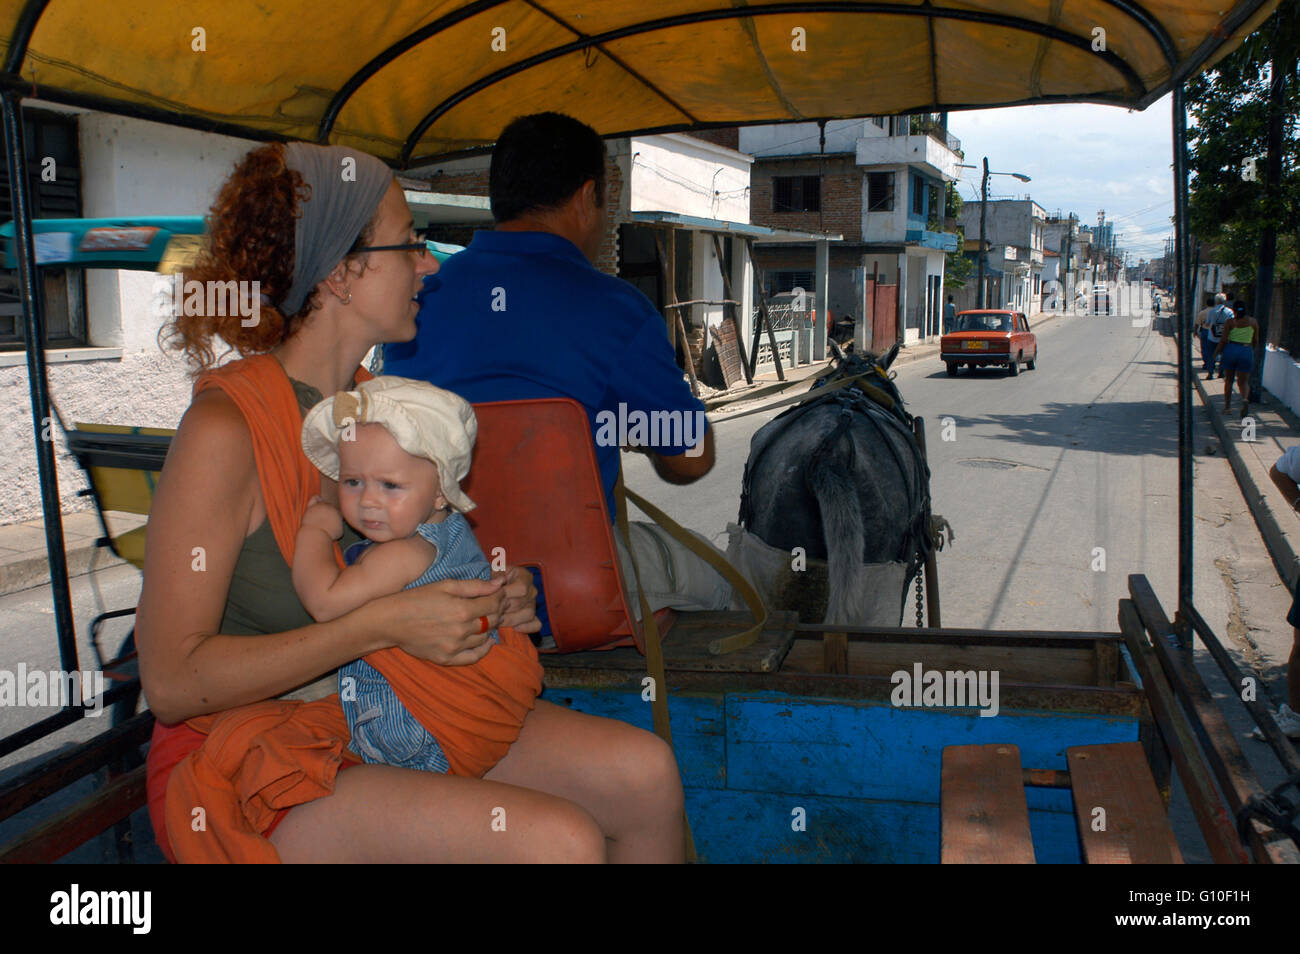 Tourist mother with her doughter inside a carriage. Horse and wagon on city street common transportation in Cuba Santa Clara, Cuba. Stock Photo